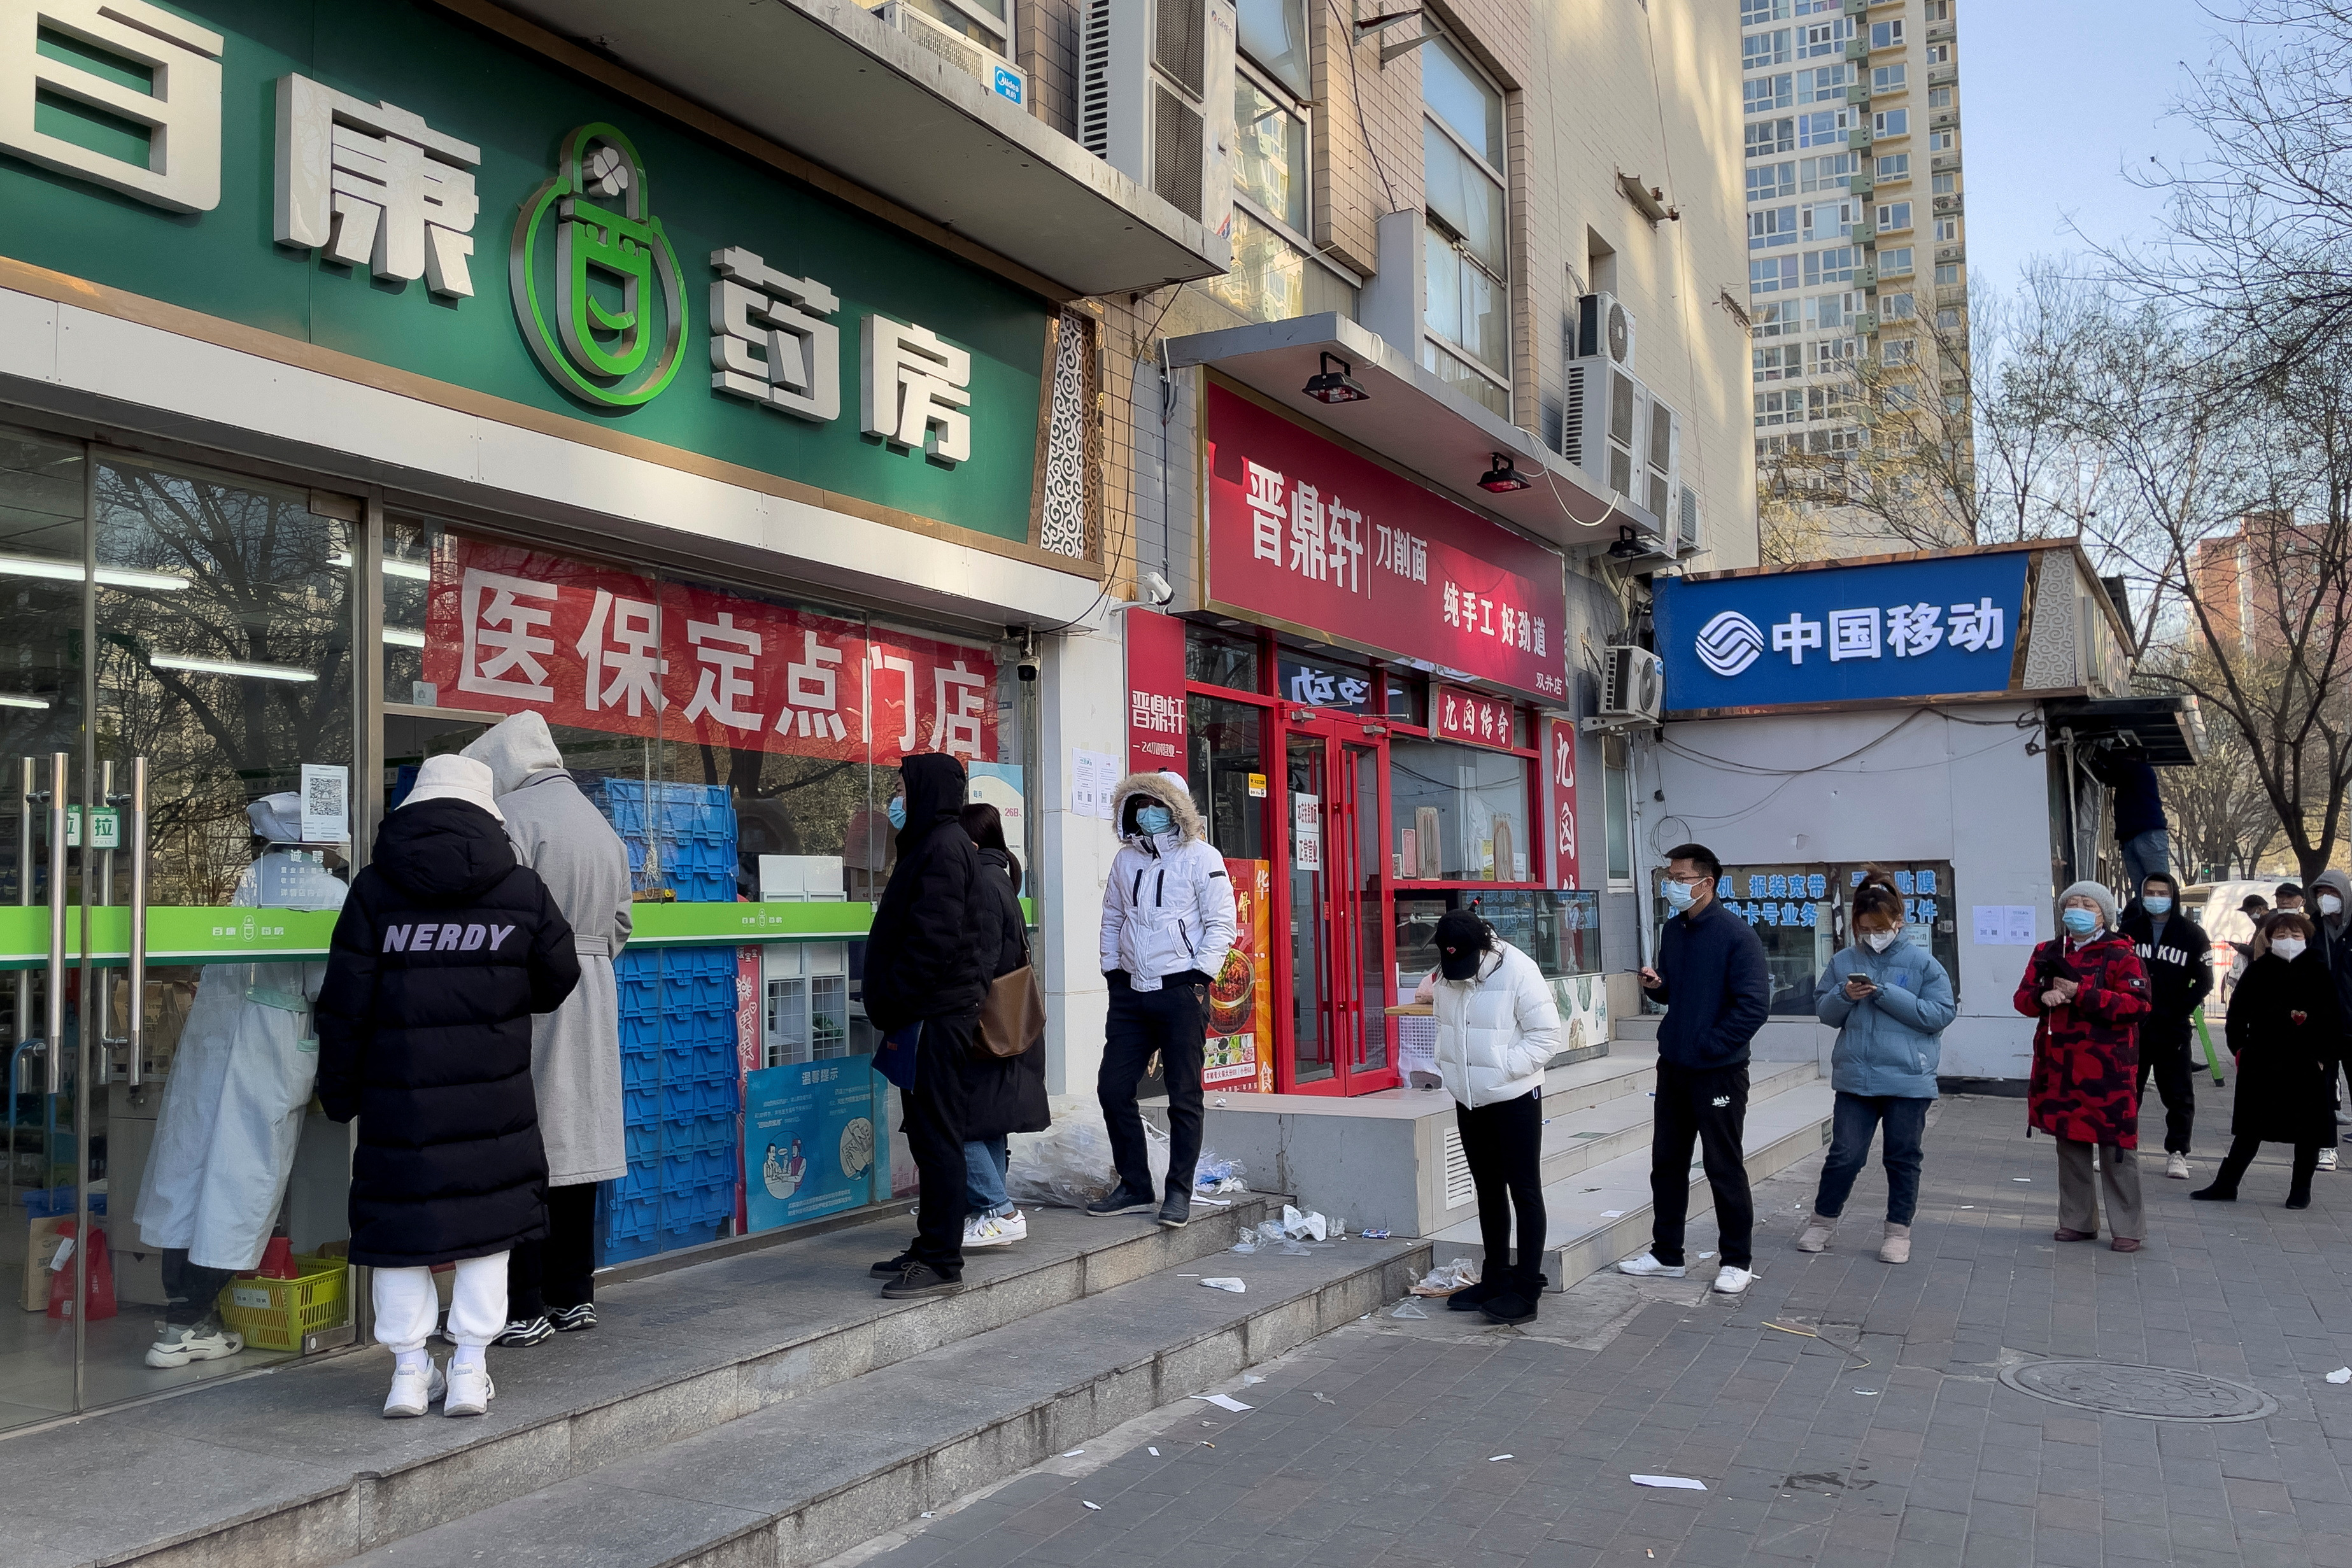 People wearing masks line up outside a pharmacy to buy products as coronavirus disease (COVID-19) outbreaks continue in Beijing